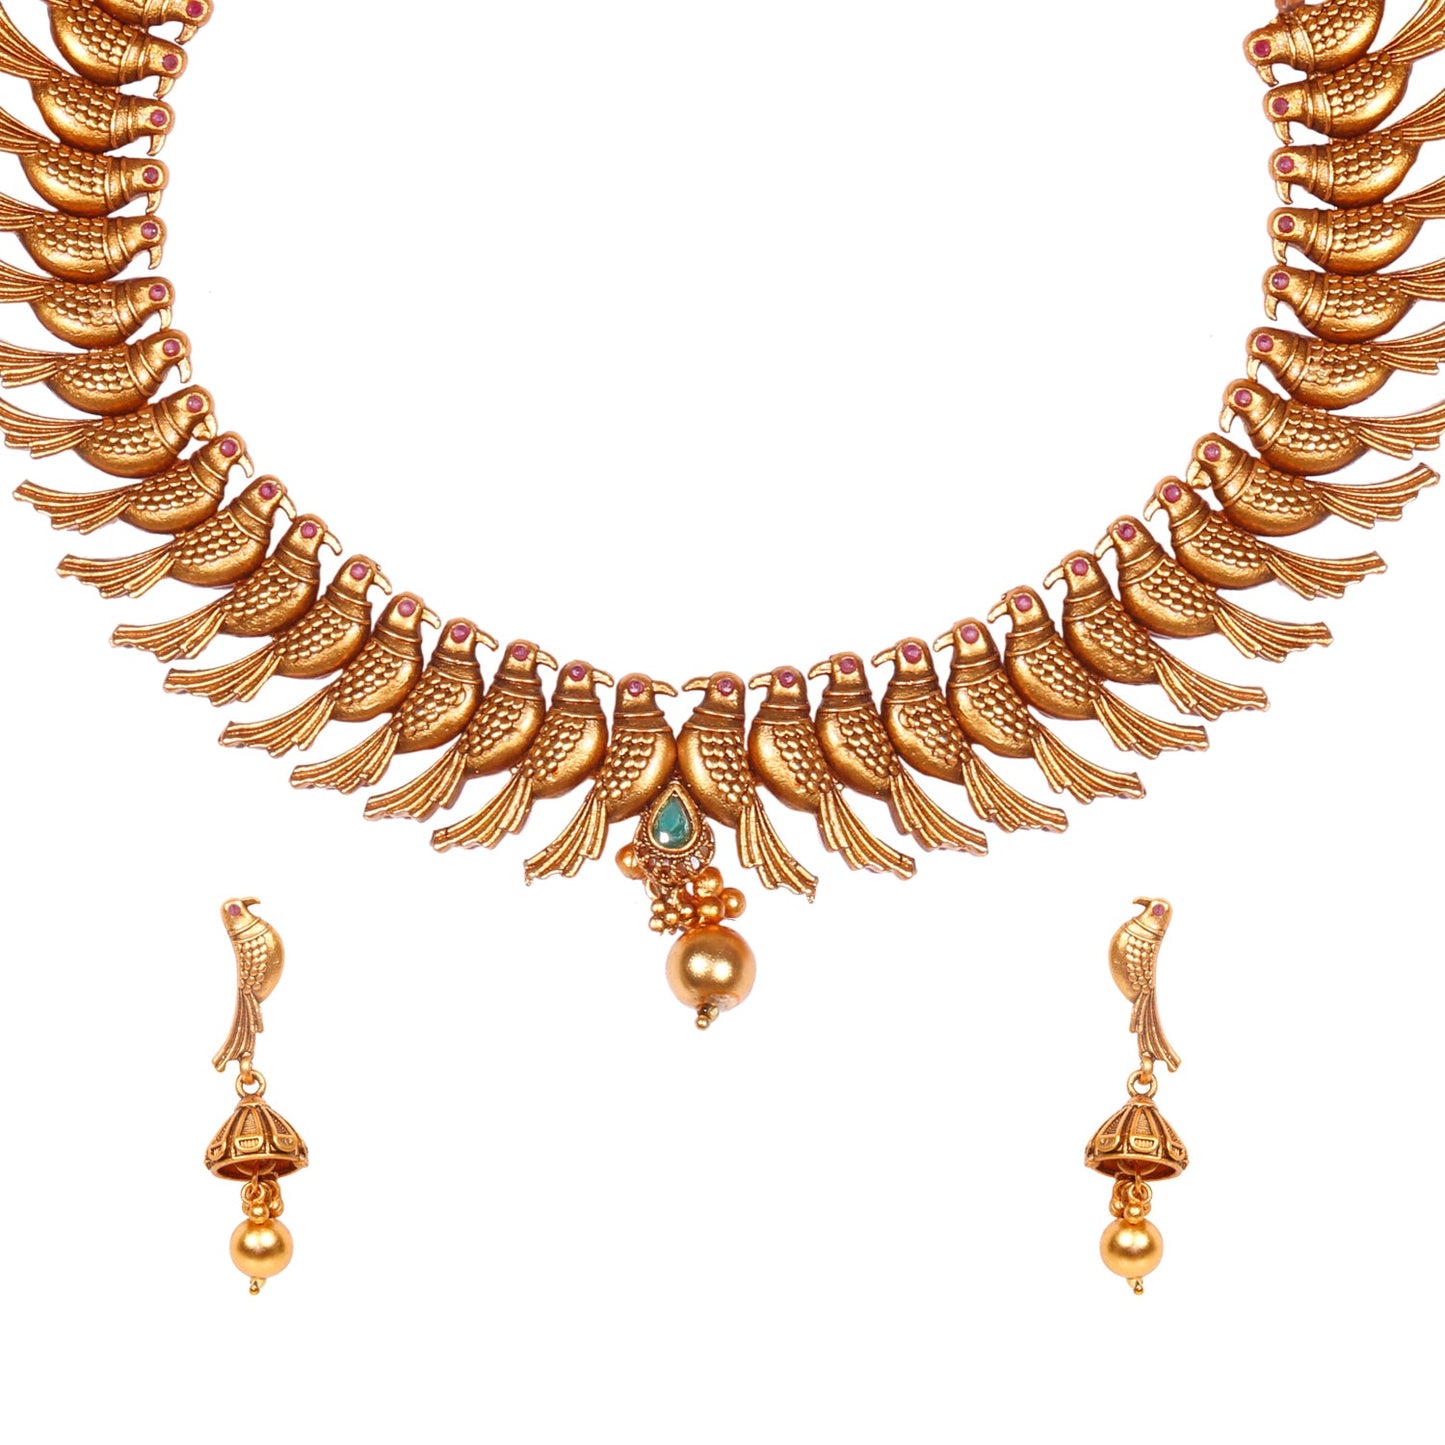 Traditional Indian Handcrafted 18K Antique Gold Plated Temple Parrot Jewellery Necklace With Matching Earring For Women (SJ_2918) - Shining Jewel